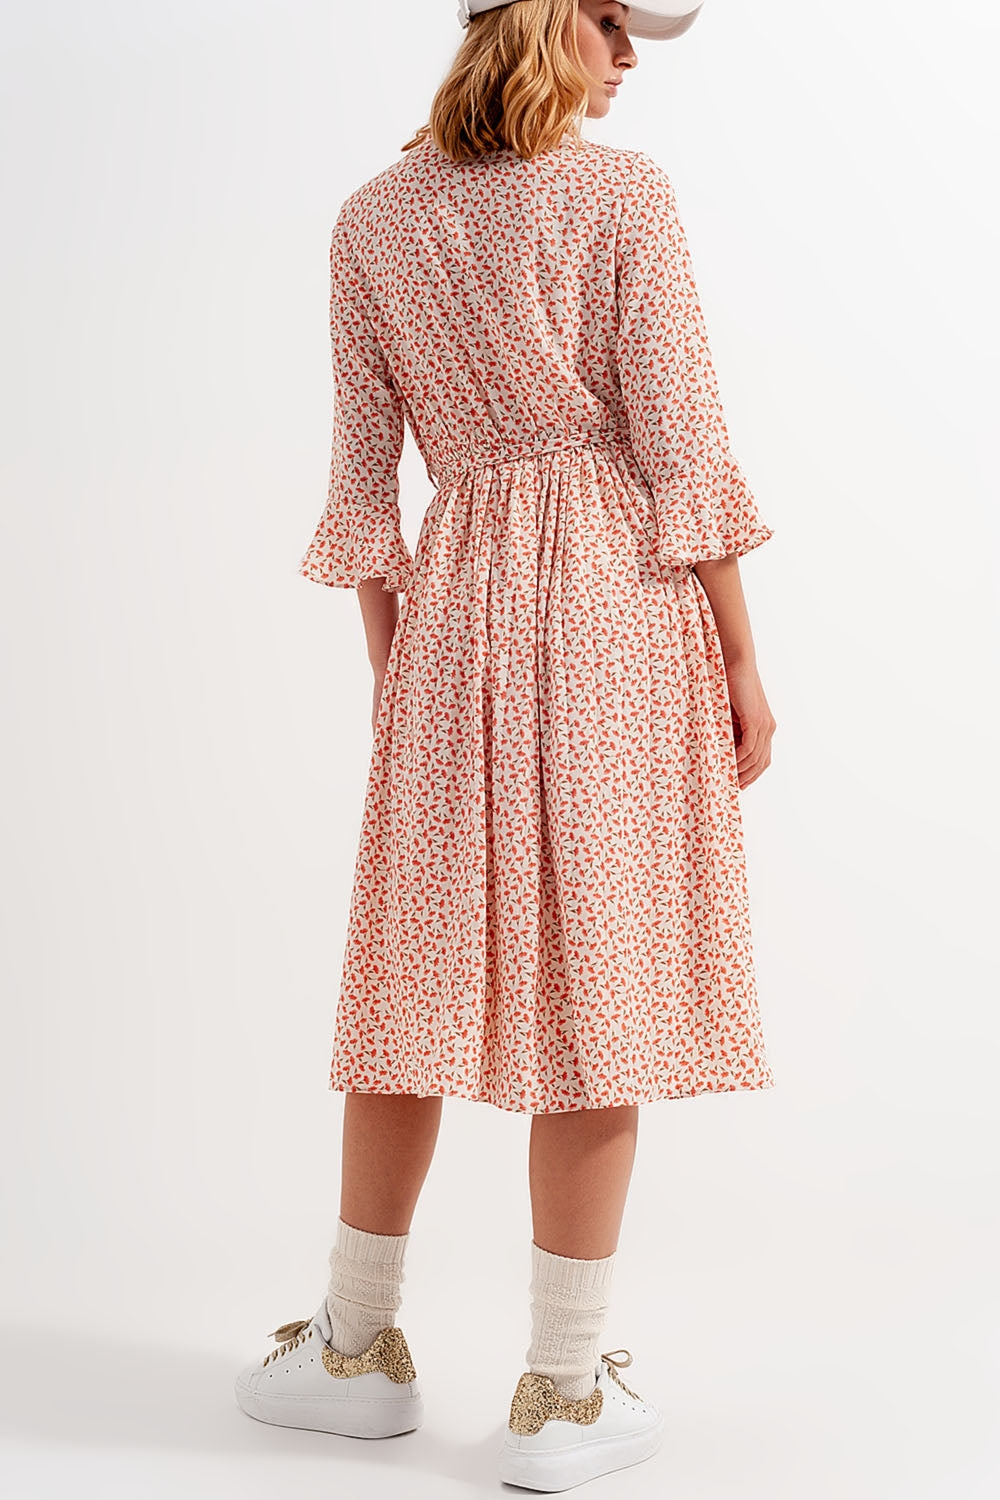 Buttoned Midi Dress With High Collar in Floral Print Coral